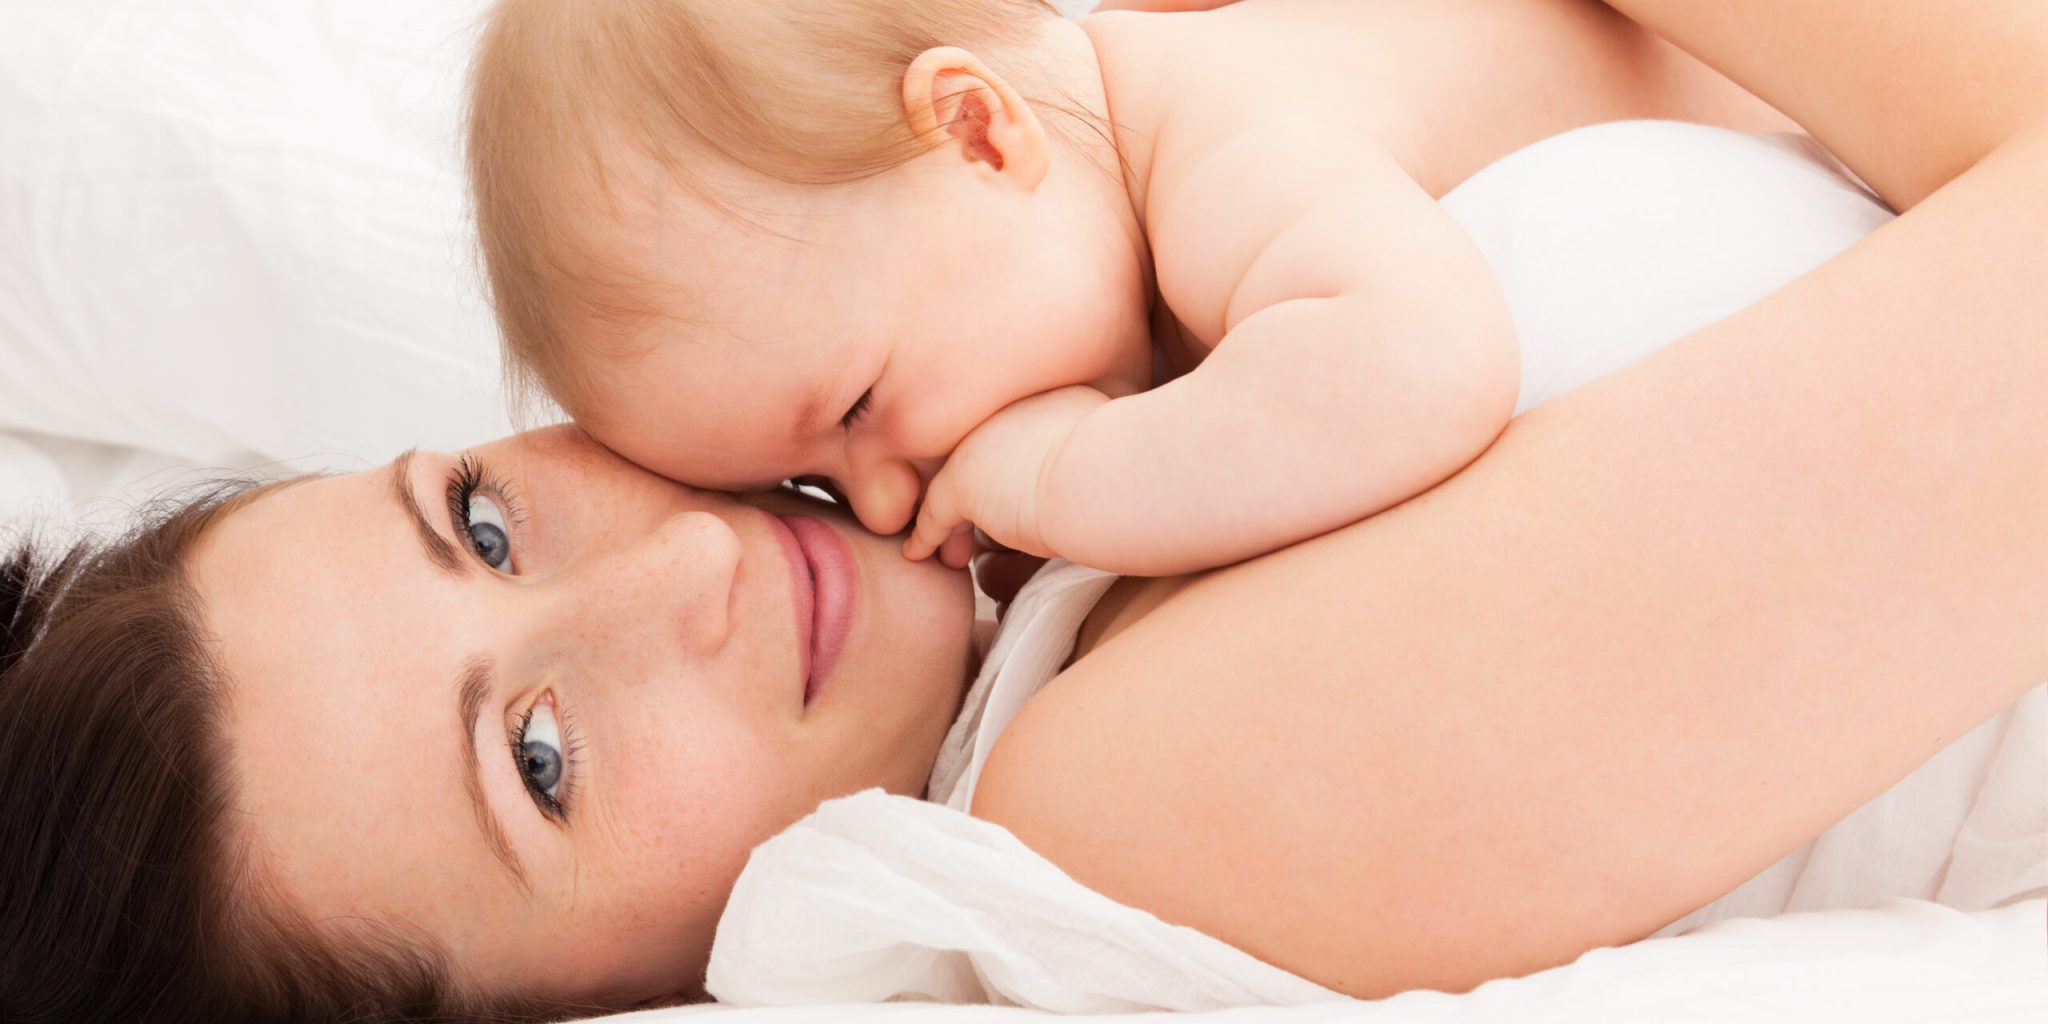 Cute,Embracing,Mother,With,Baby,In,Bed,Enjoying,Time,Together